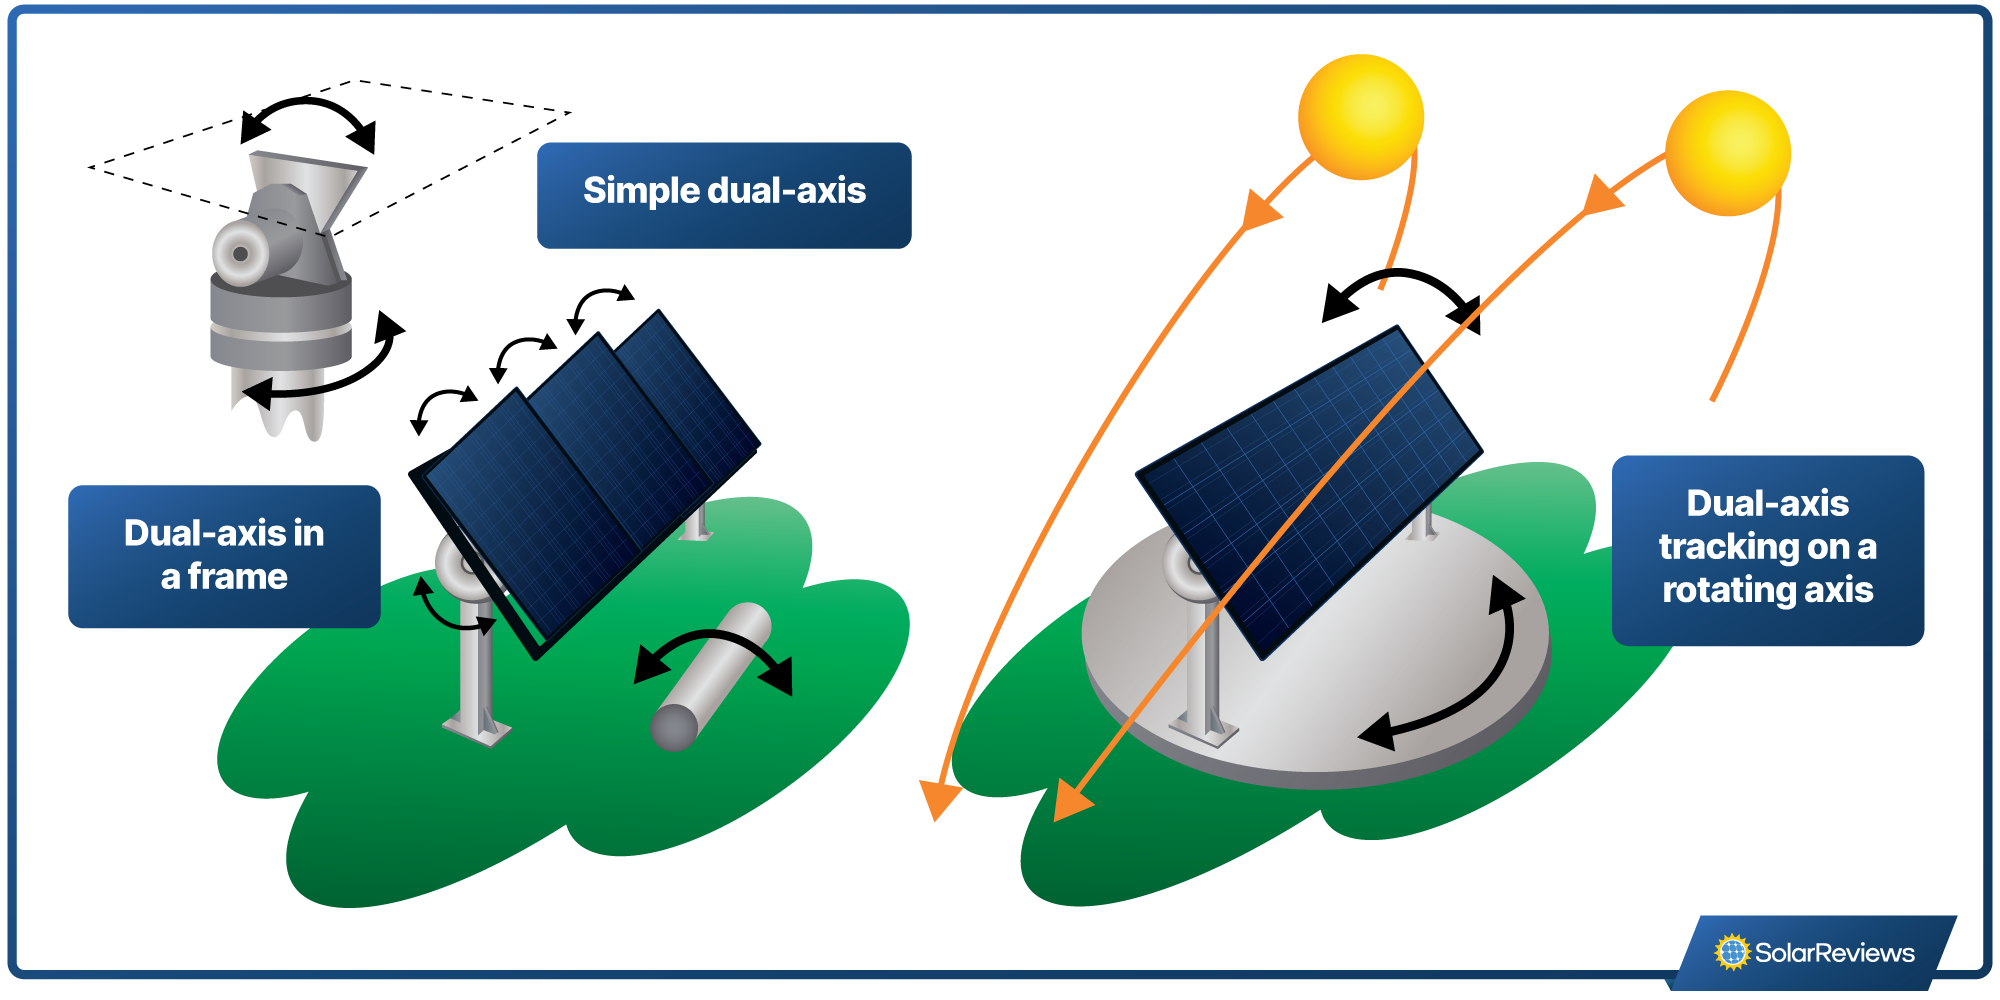 Graphic showing a simple dual-axis tracker and dual-axis tracker on a rotating axis side-by-side